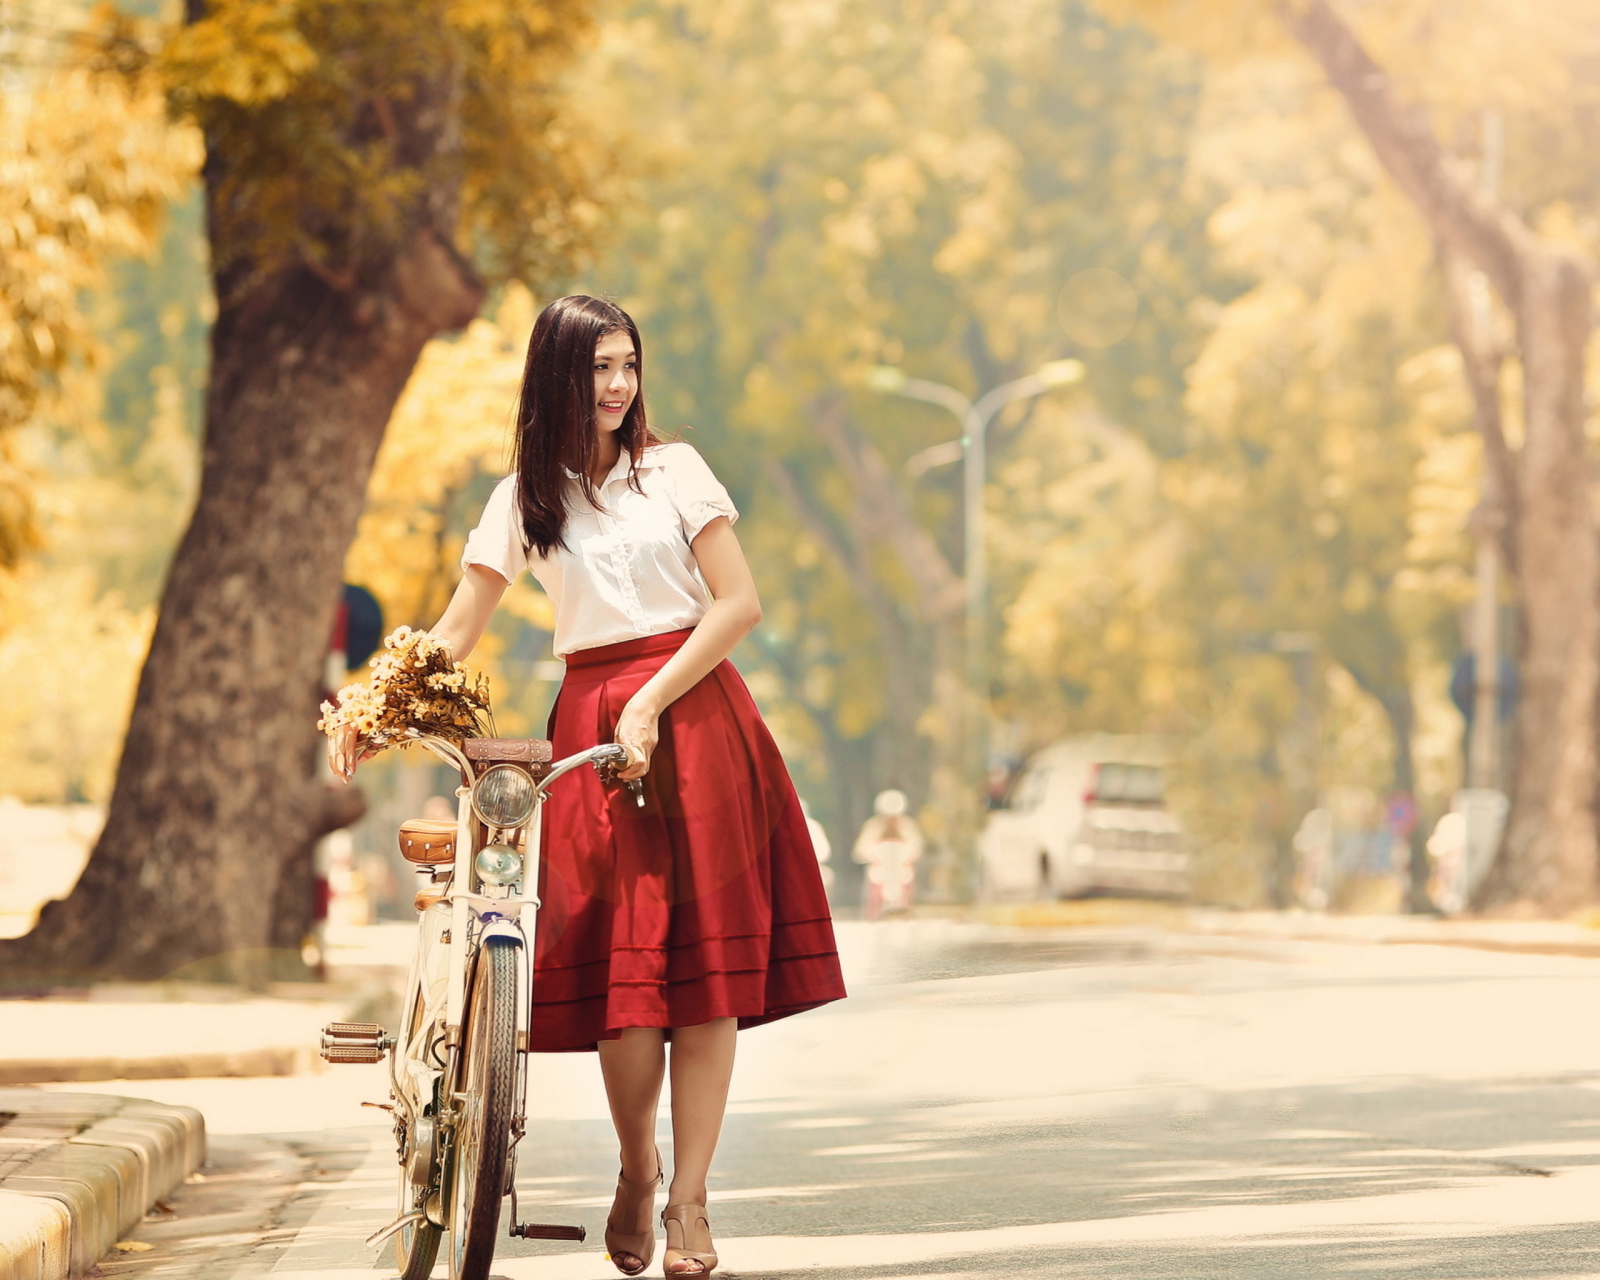 Romantic Girl With Bicycle And Flowers screenshot #1 1600x1280